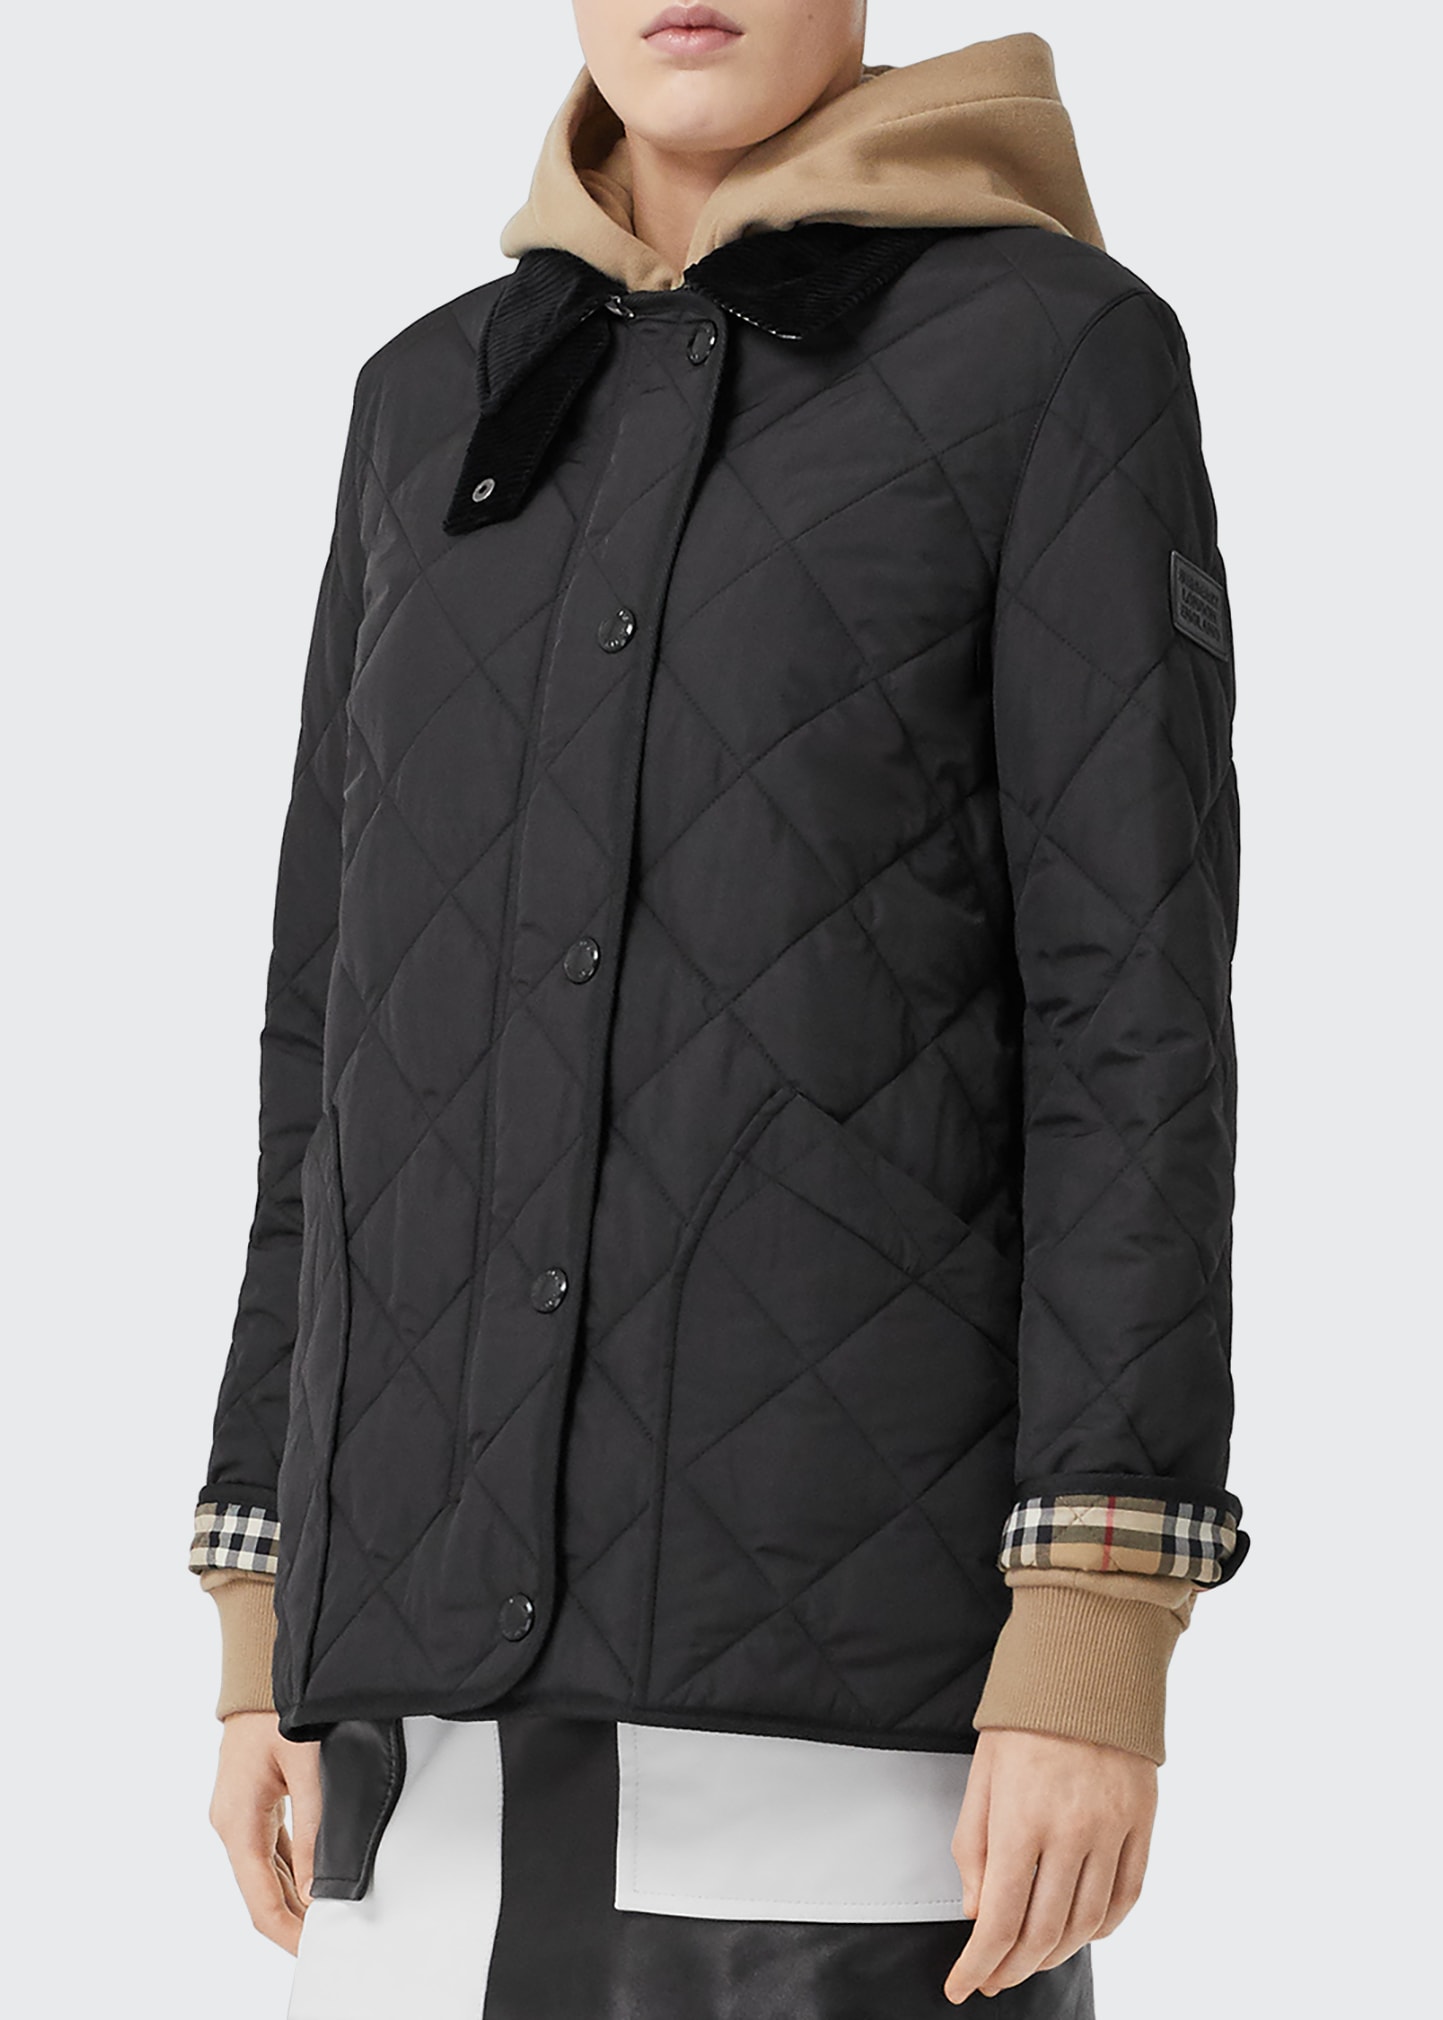 Cotswold Quilted Barn Jacket, Black